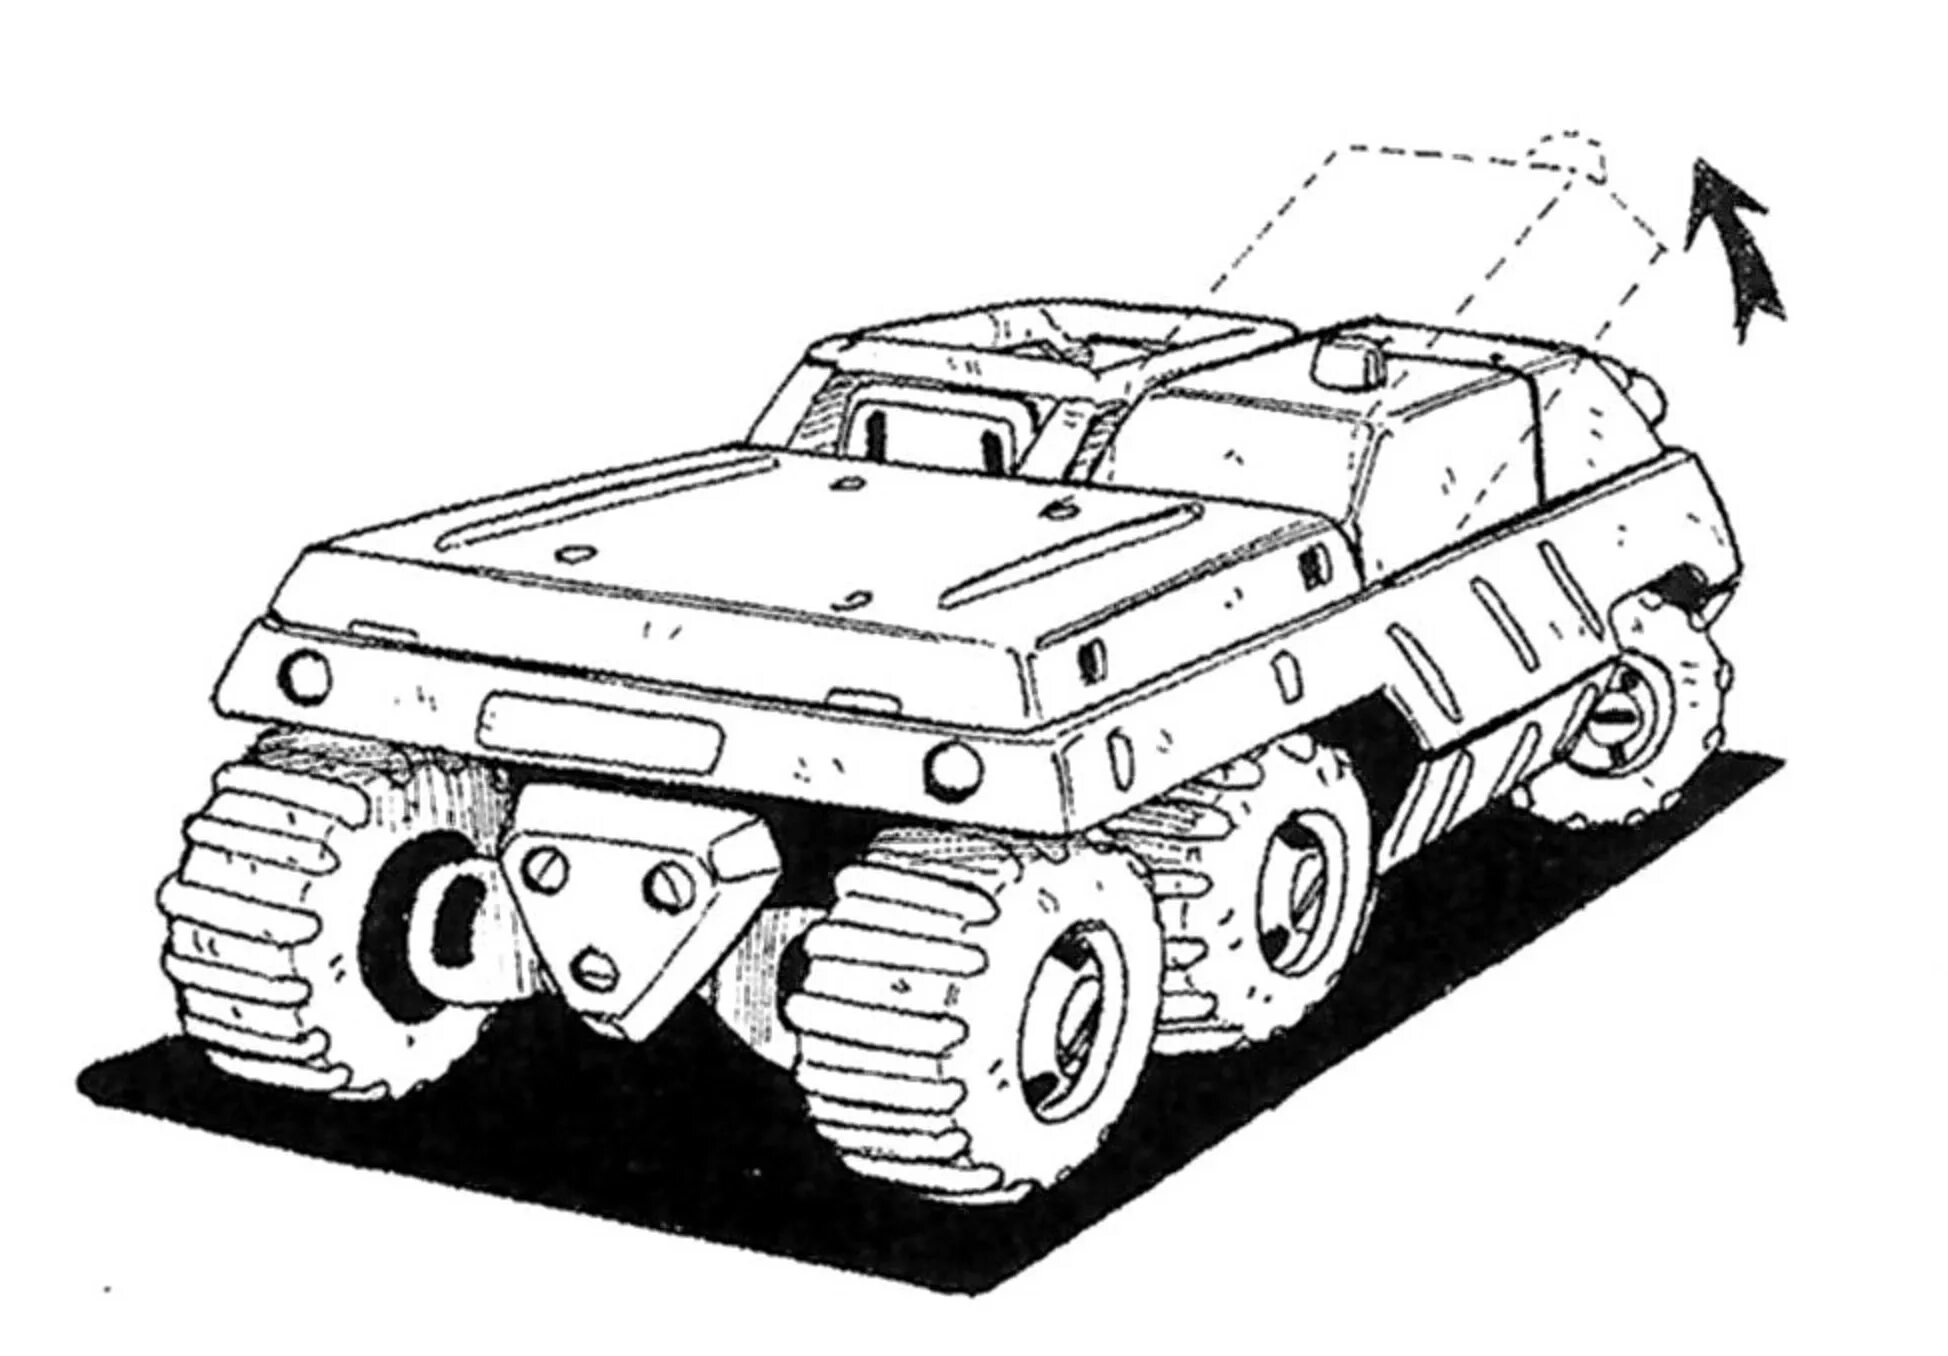 A fun armored personnel carrier coloring book for kids